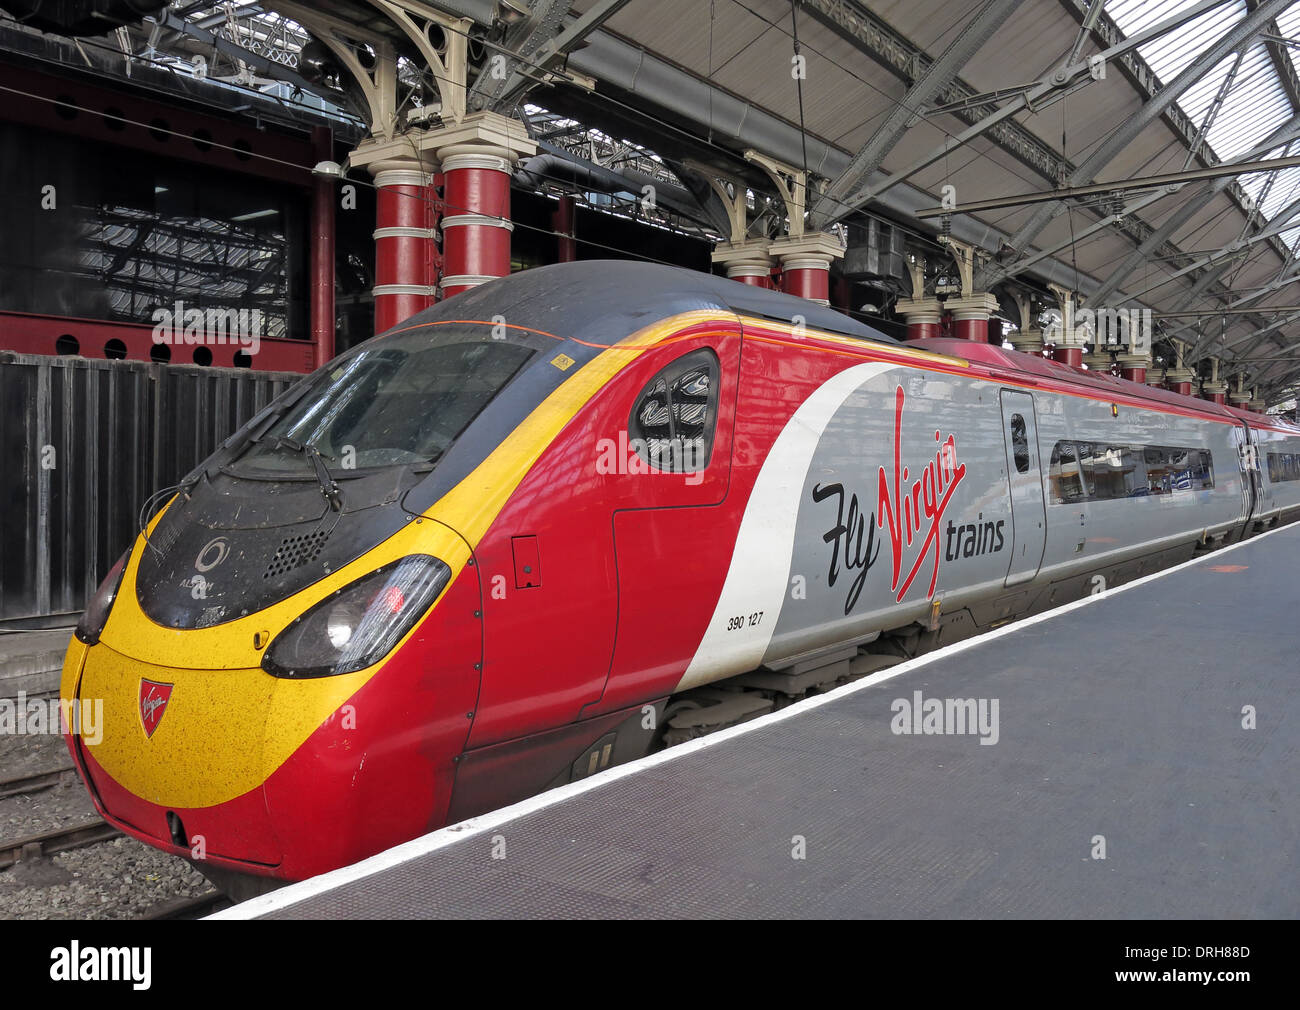 Fly Virgin Trains UK - Liverpool Lime St to Euston - red white & gray livery Stock Photo